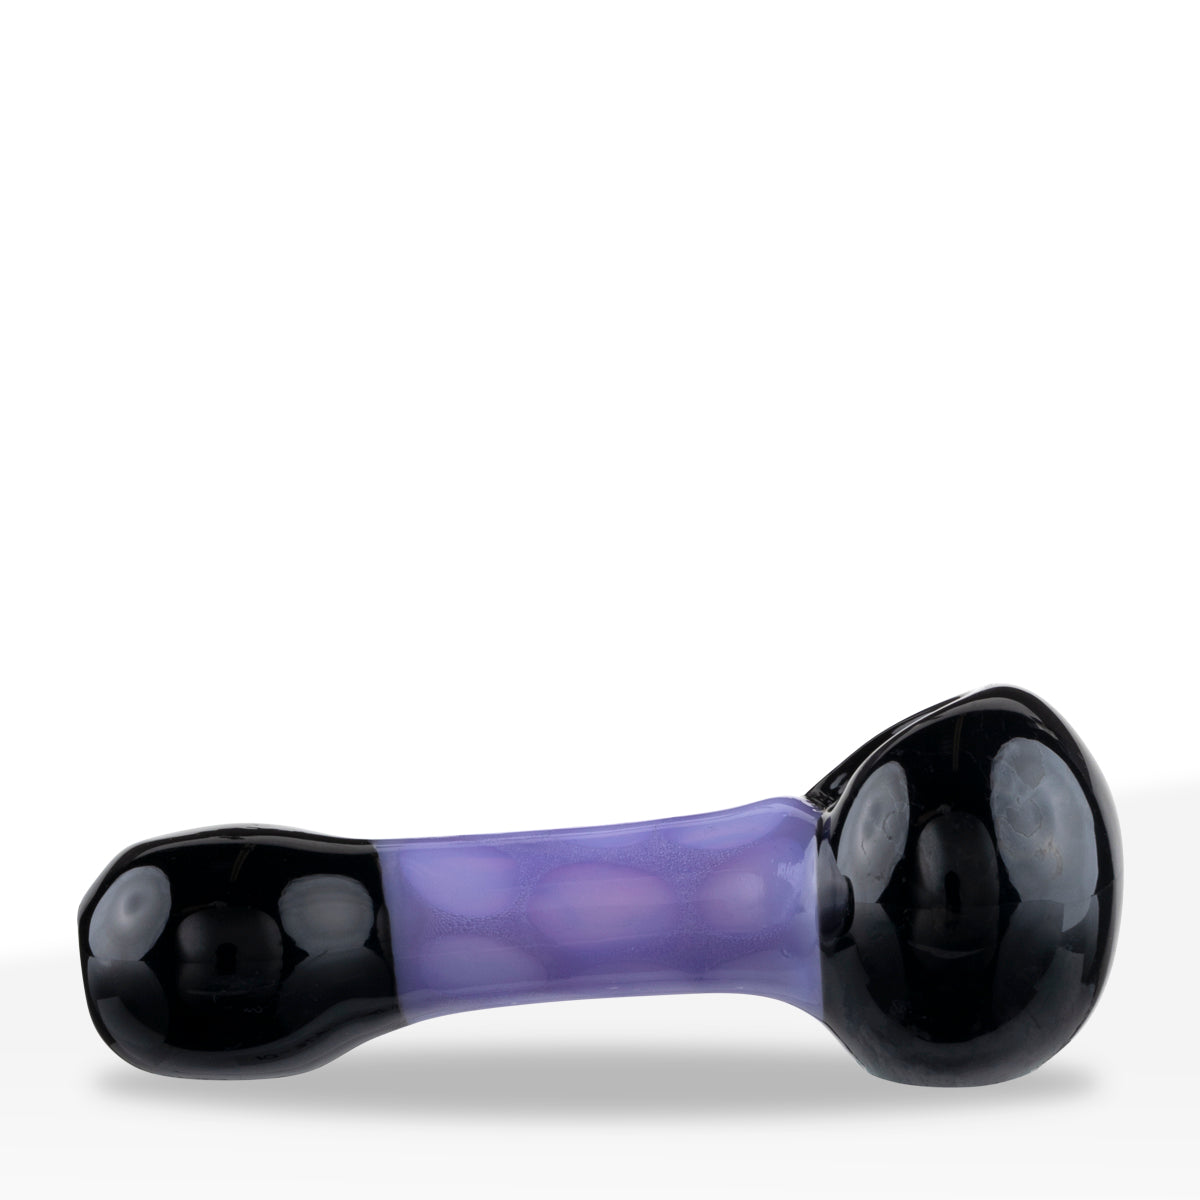 Hand Pipe | Bubble Glass Spoon Hand Pipe Black w/ Slyme | 3.5" - Glass - 3 Count